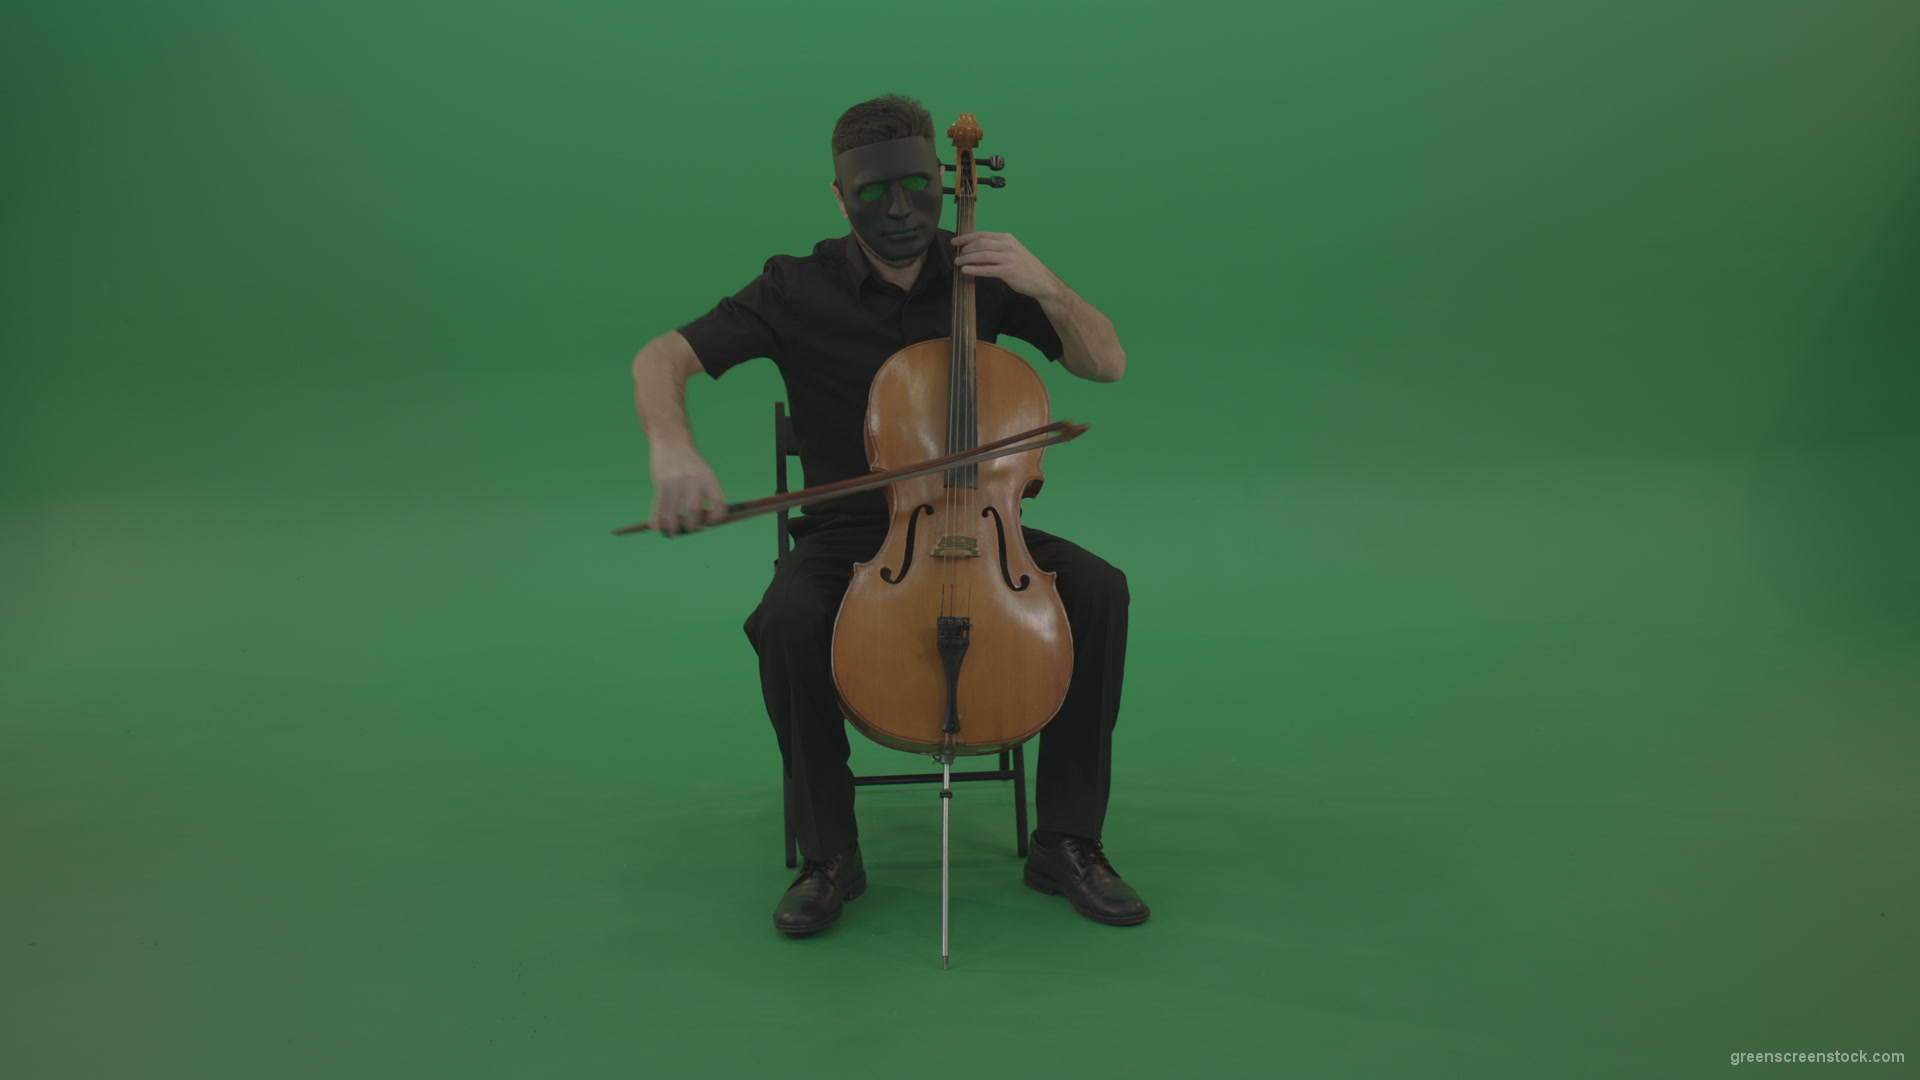 Full-size-man-in-black-wear-and-mask-play-violoncello-cello-strings-music-instrument-isolated-on-green-screen_007 Green Screen Stock